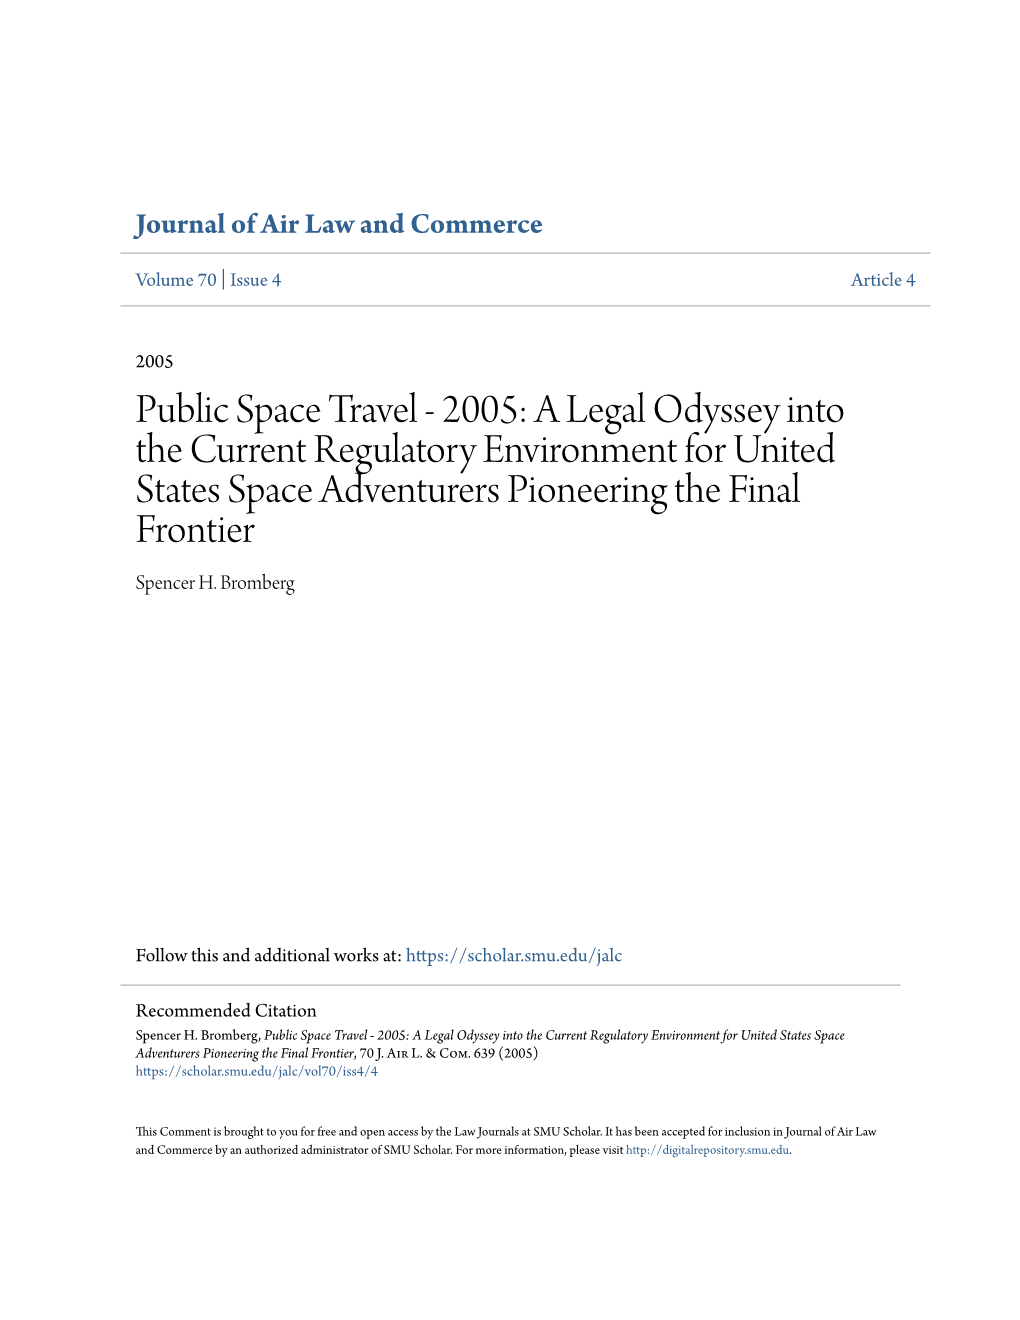 Public Space Travel - 2005: a Legal Odyssey Into the Current Regulatory Environment for United States Space Adventurers Pioneering the Final Frontier Spencer H